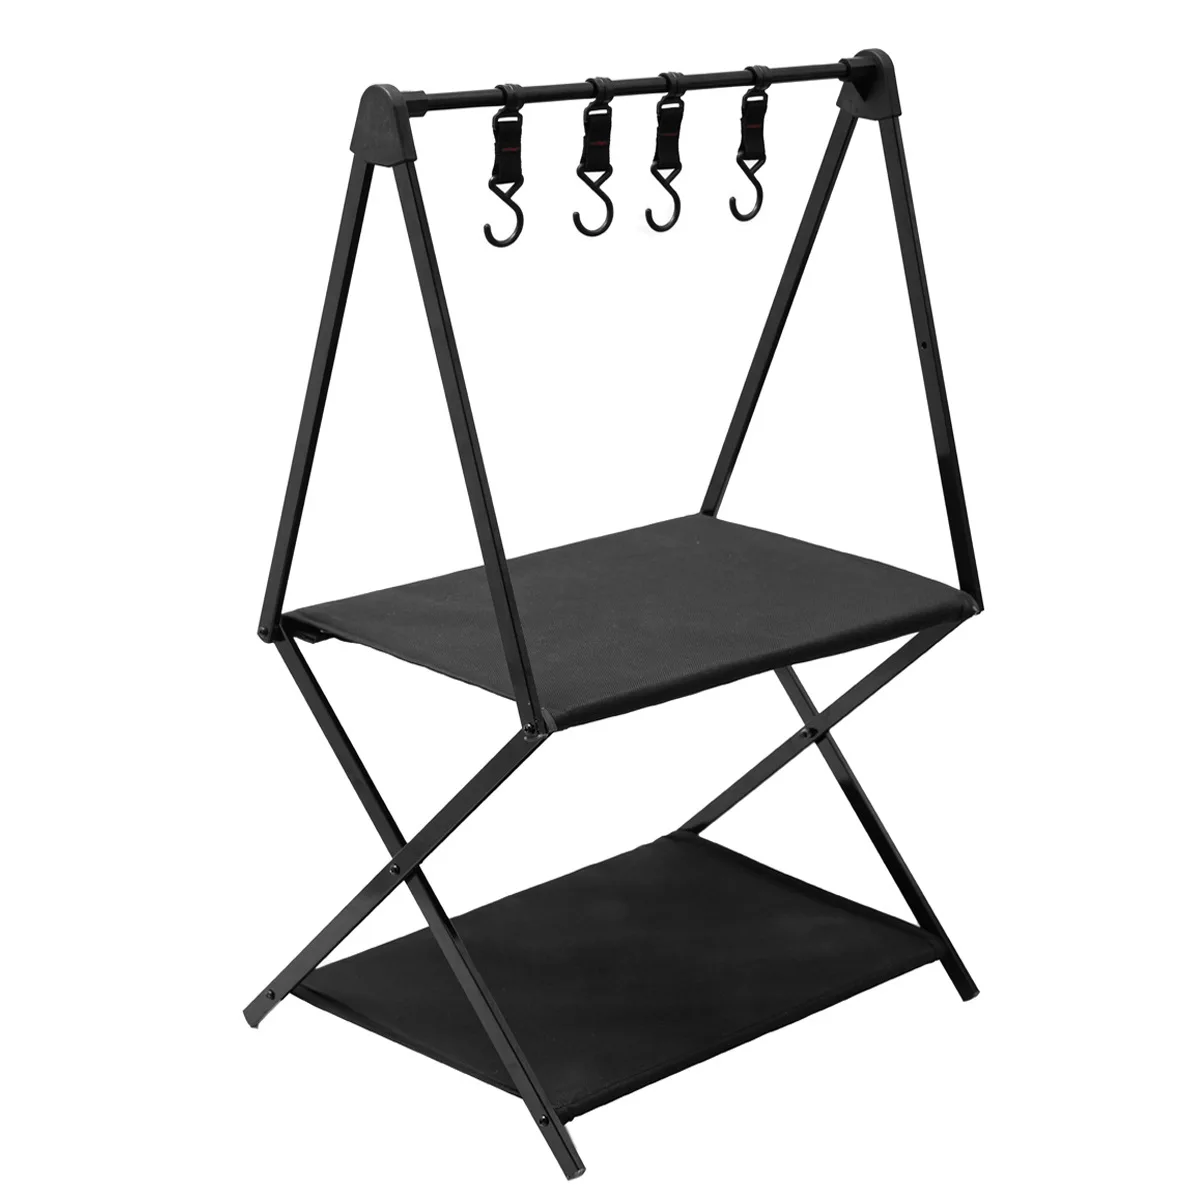 Outdoor Camping Rack Black Two-story Three-story Shelving Camp Rack Easy To Carry Foldable Picnic Camping Barbecue Folding Table